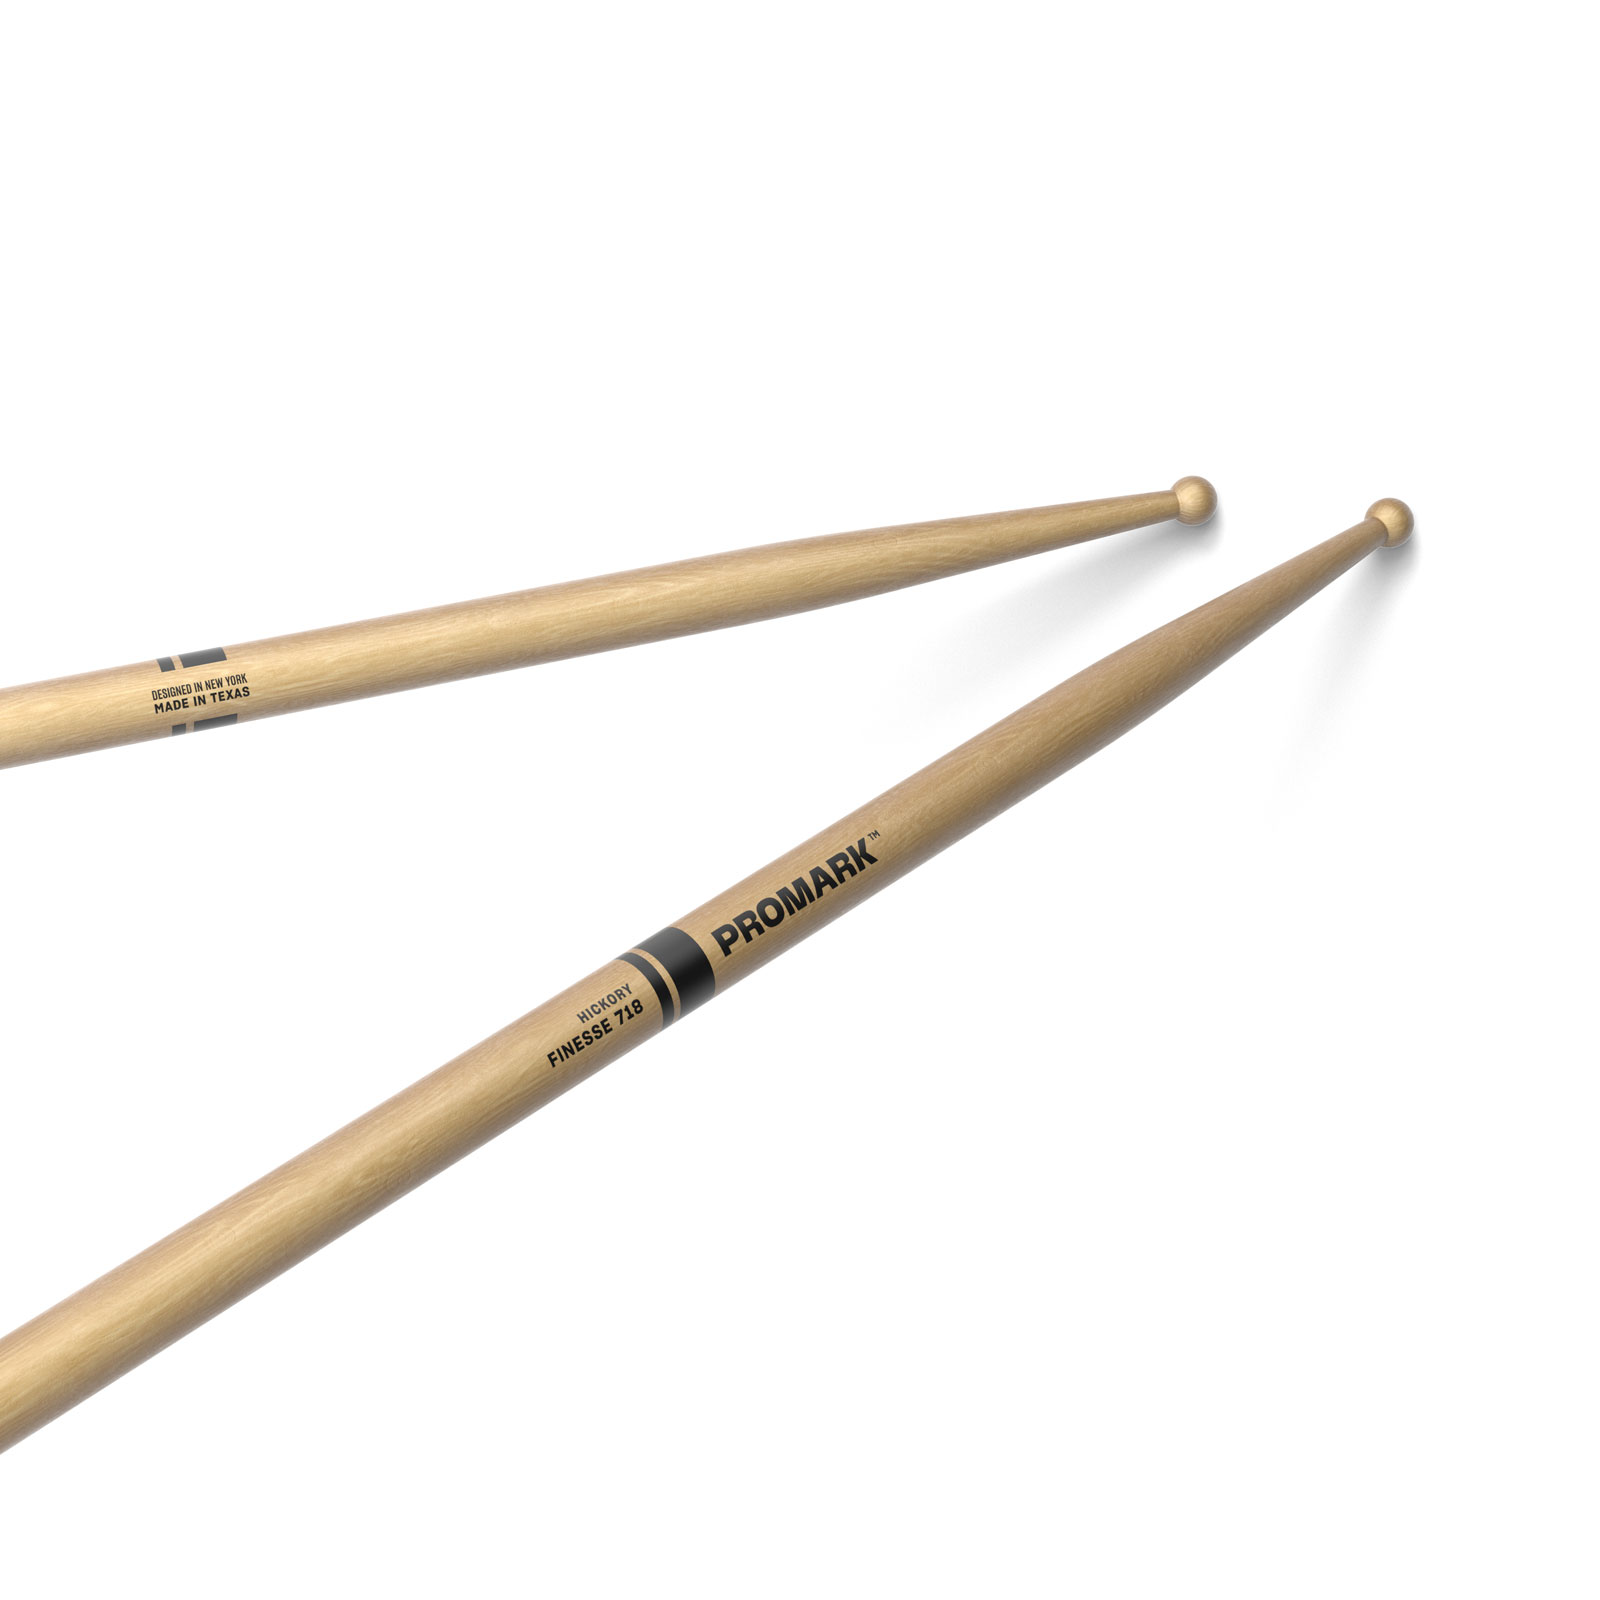 PRO MARK FINESSE 718 HICKORY DRUMSTICK SMALL ROUND WOOD TIP